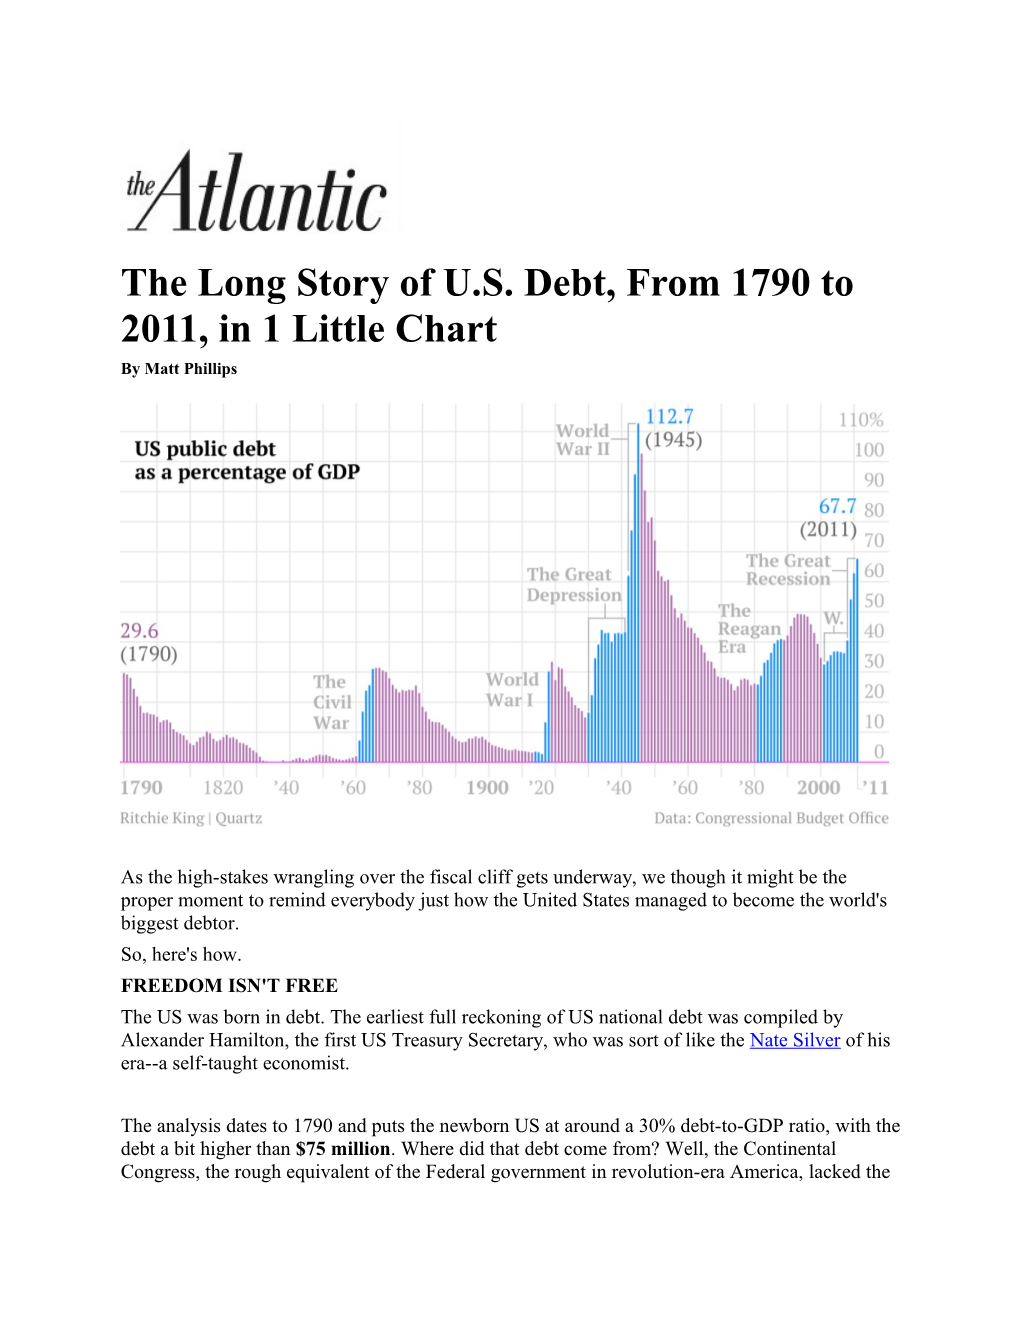 The Long Story of U.S. Debt, from 1790 to 2011, in 1 Little Chart